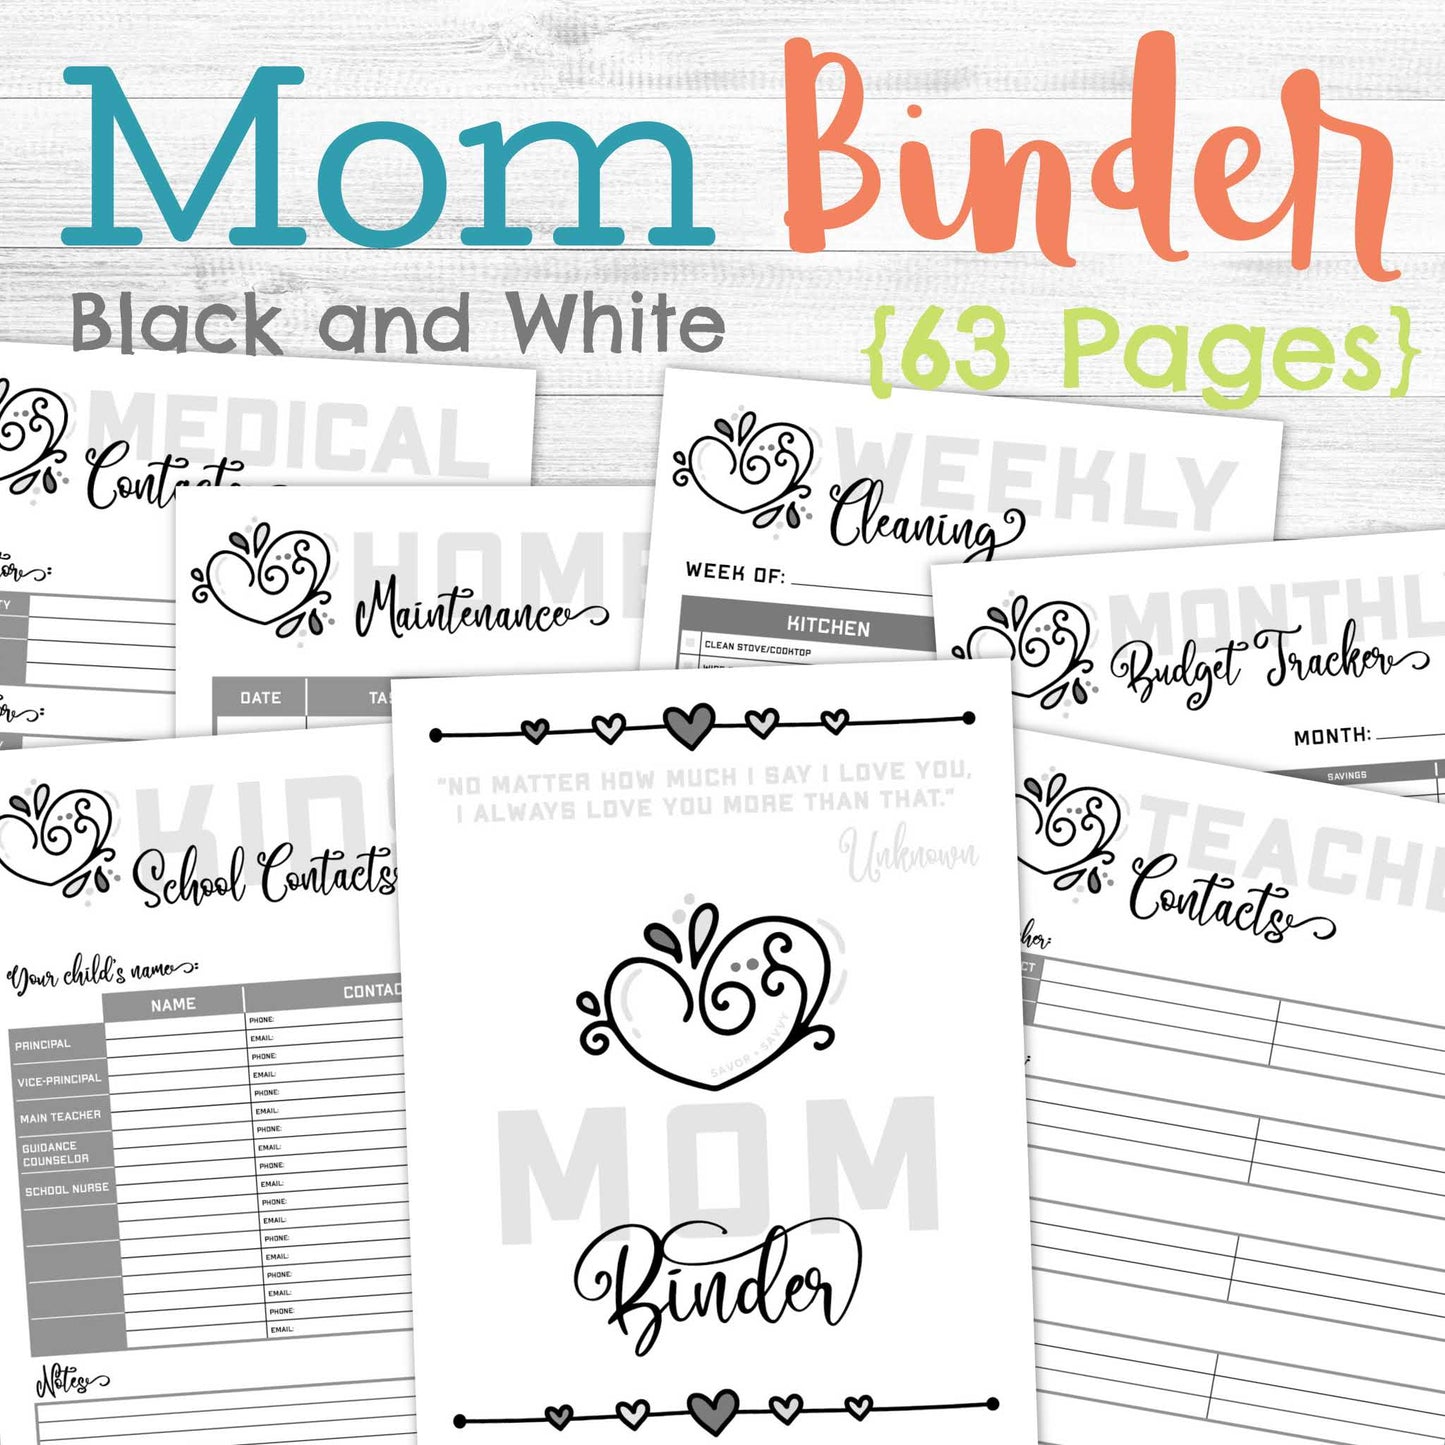 Mom Binder (63 pages) 🖇